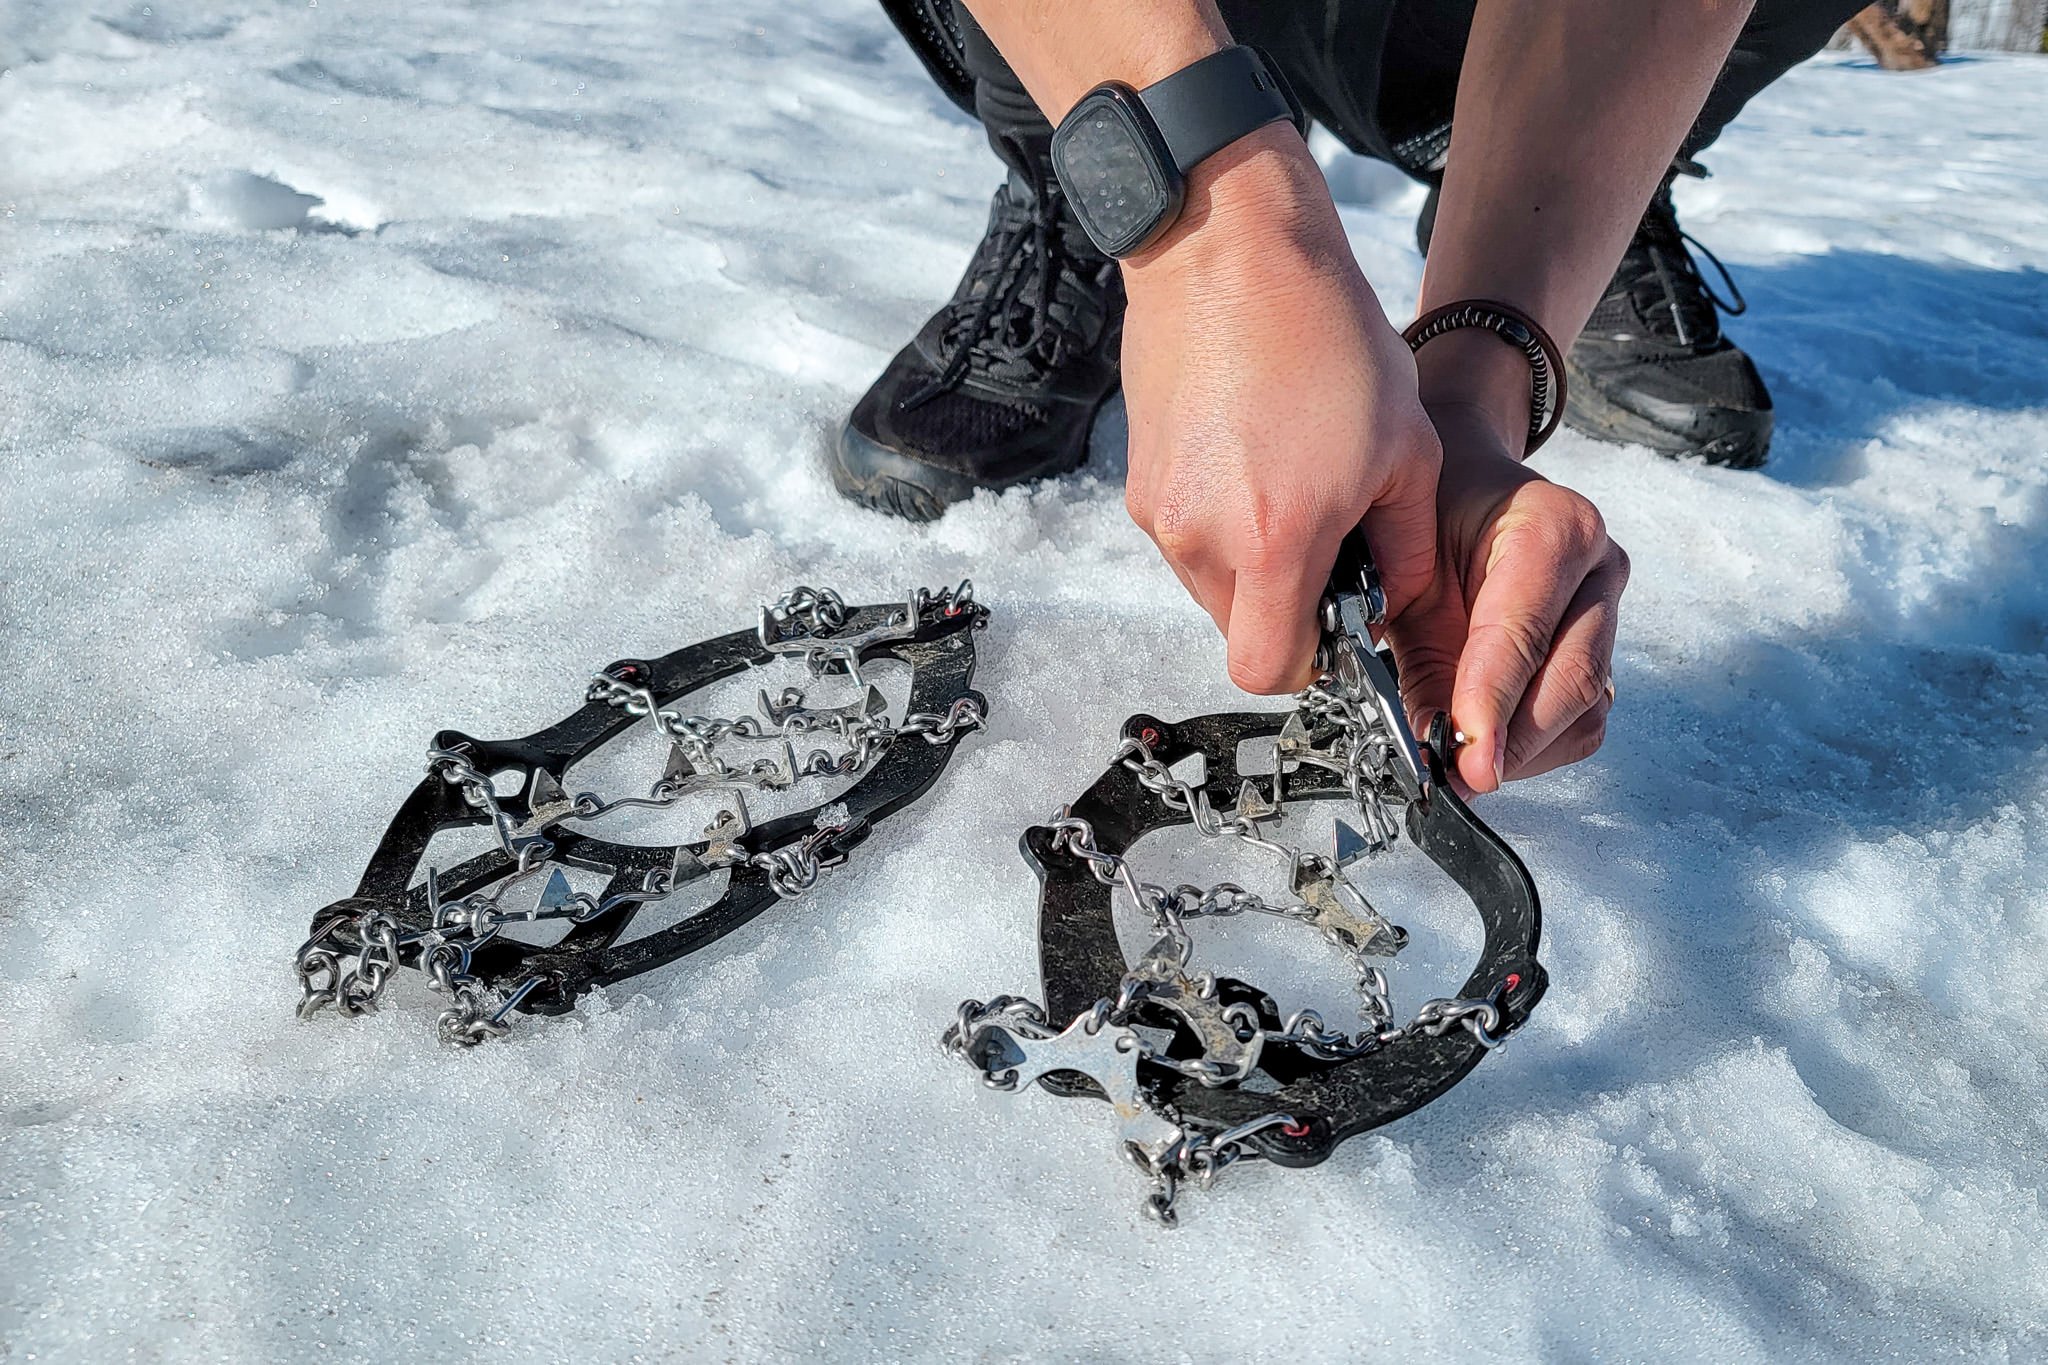 Closeup of a hiker fixing a link on the Kahtoola MICROspikes with a pair of pliers